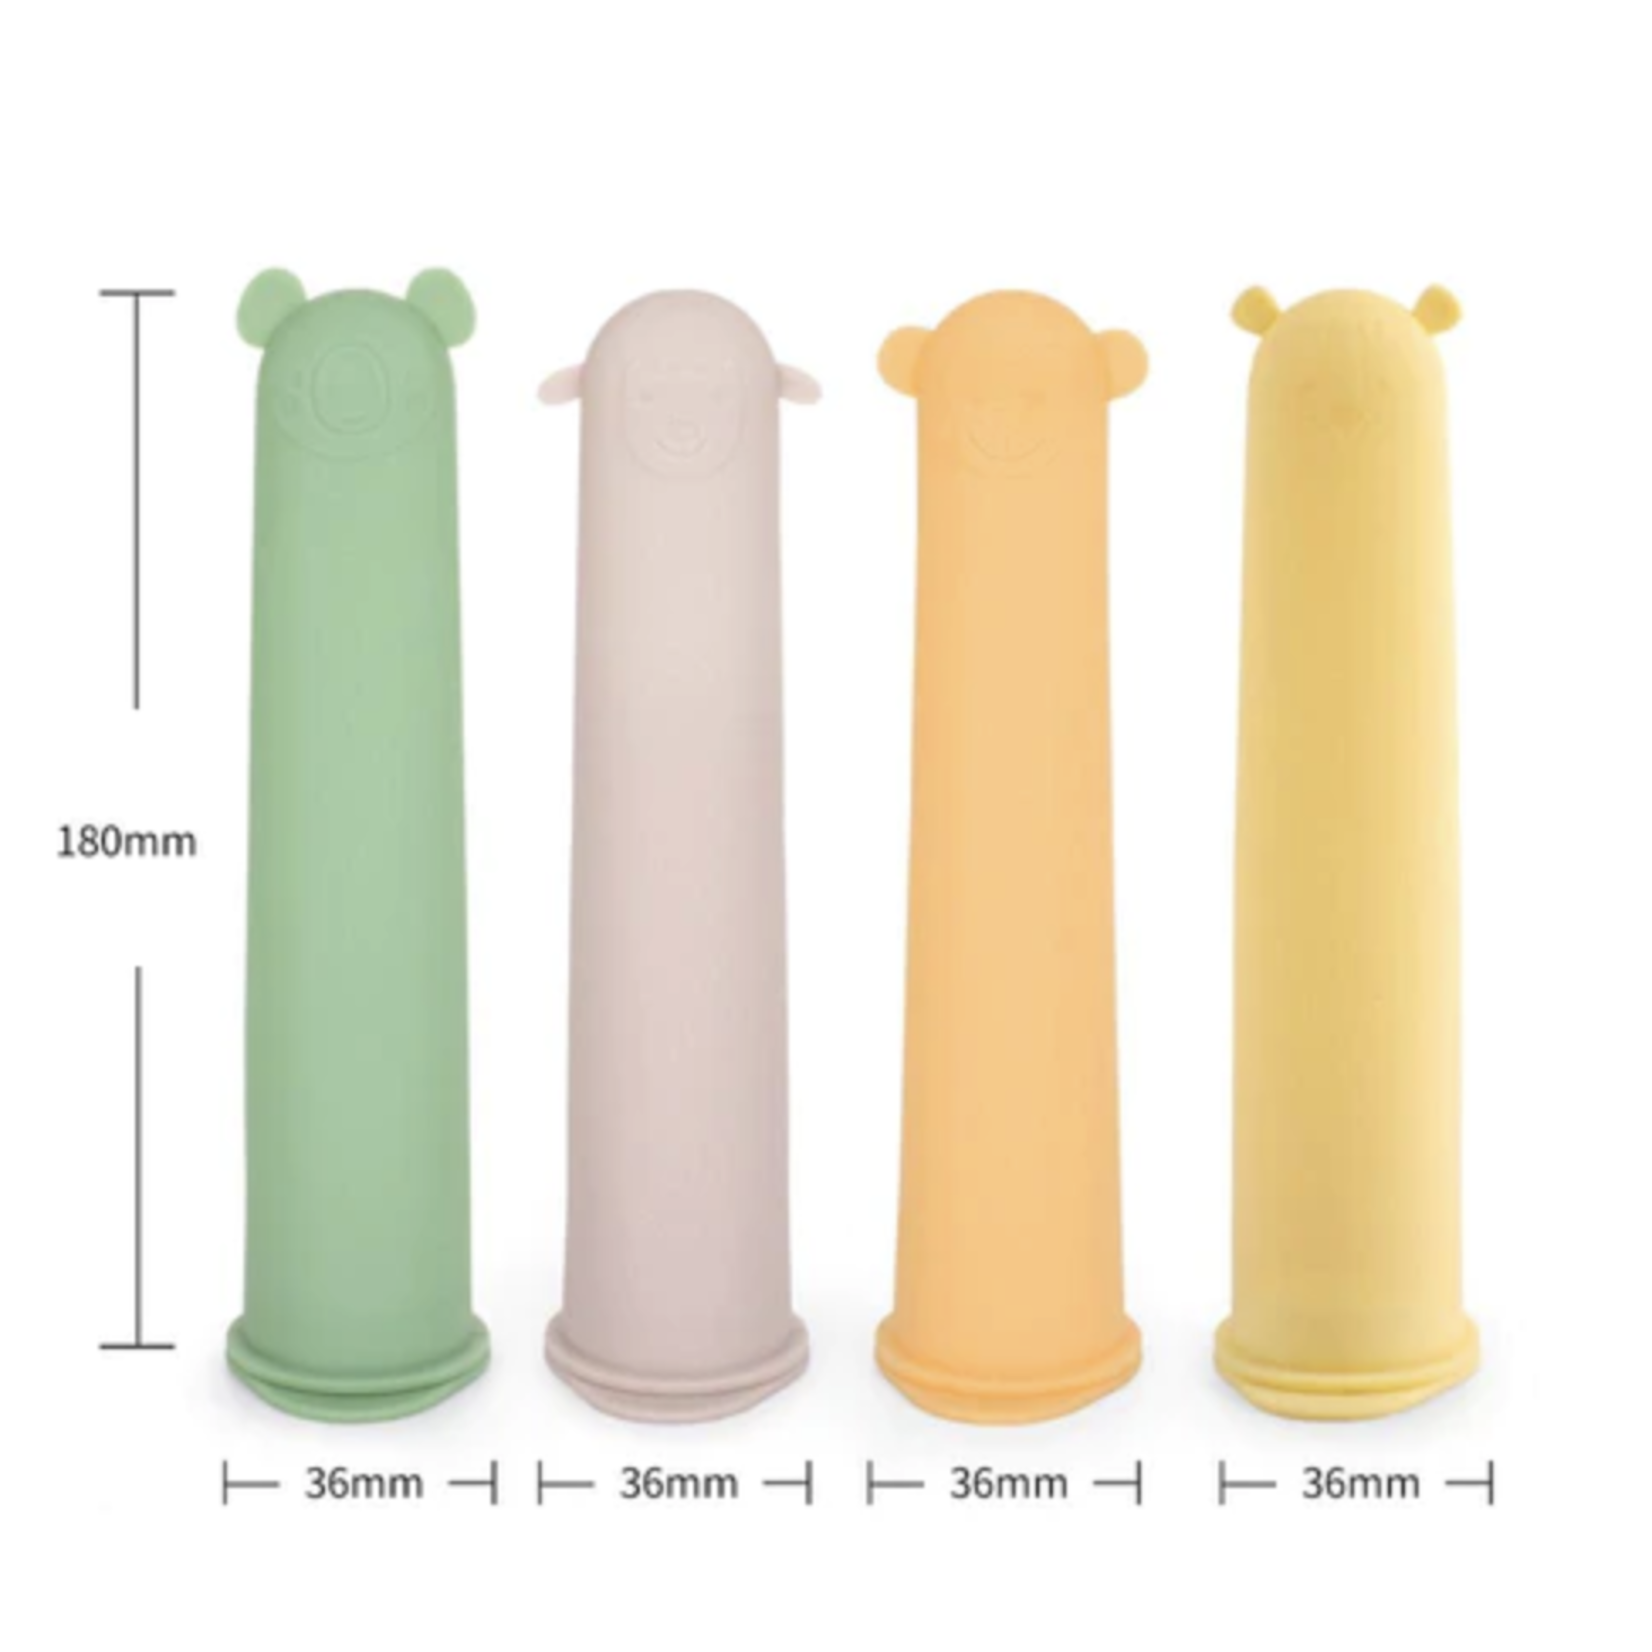 Haakaa Silicone Ice Pop Mould Set (4 pcs)